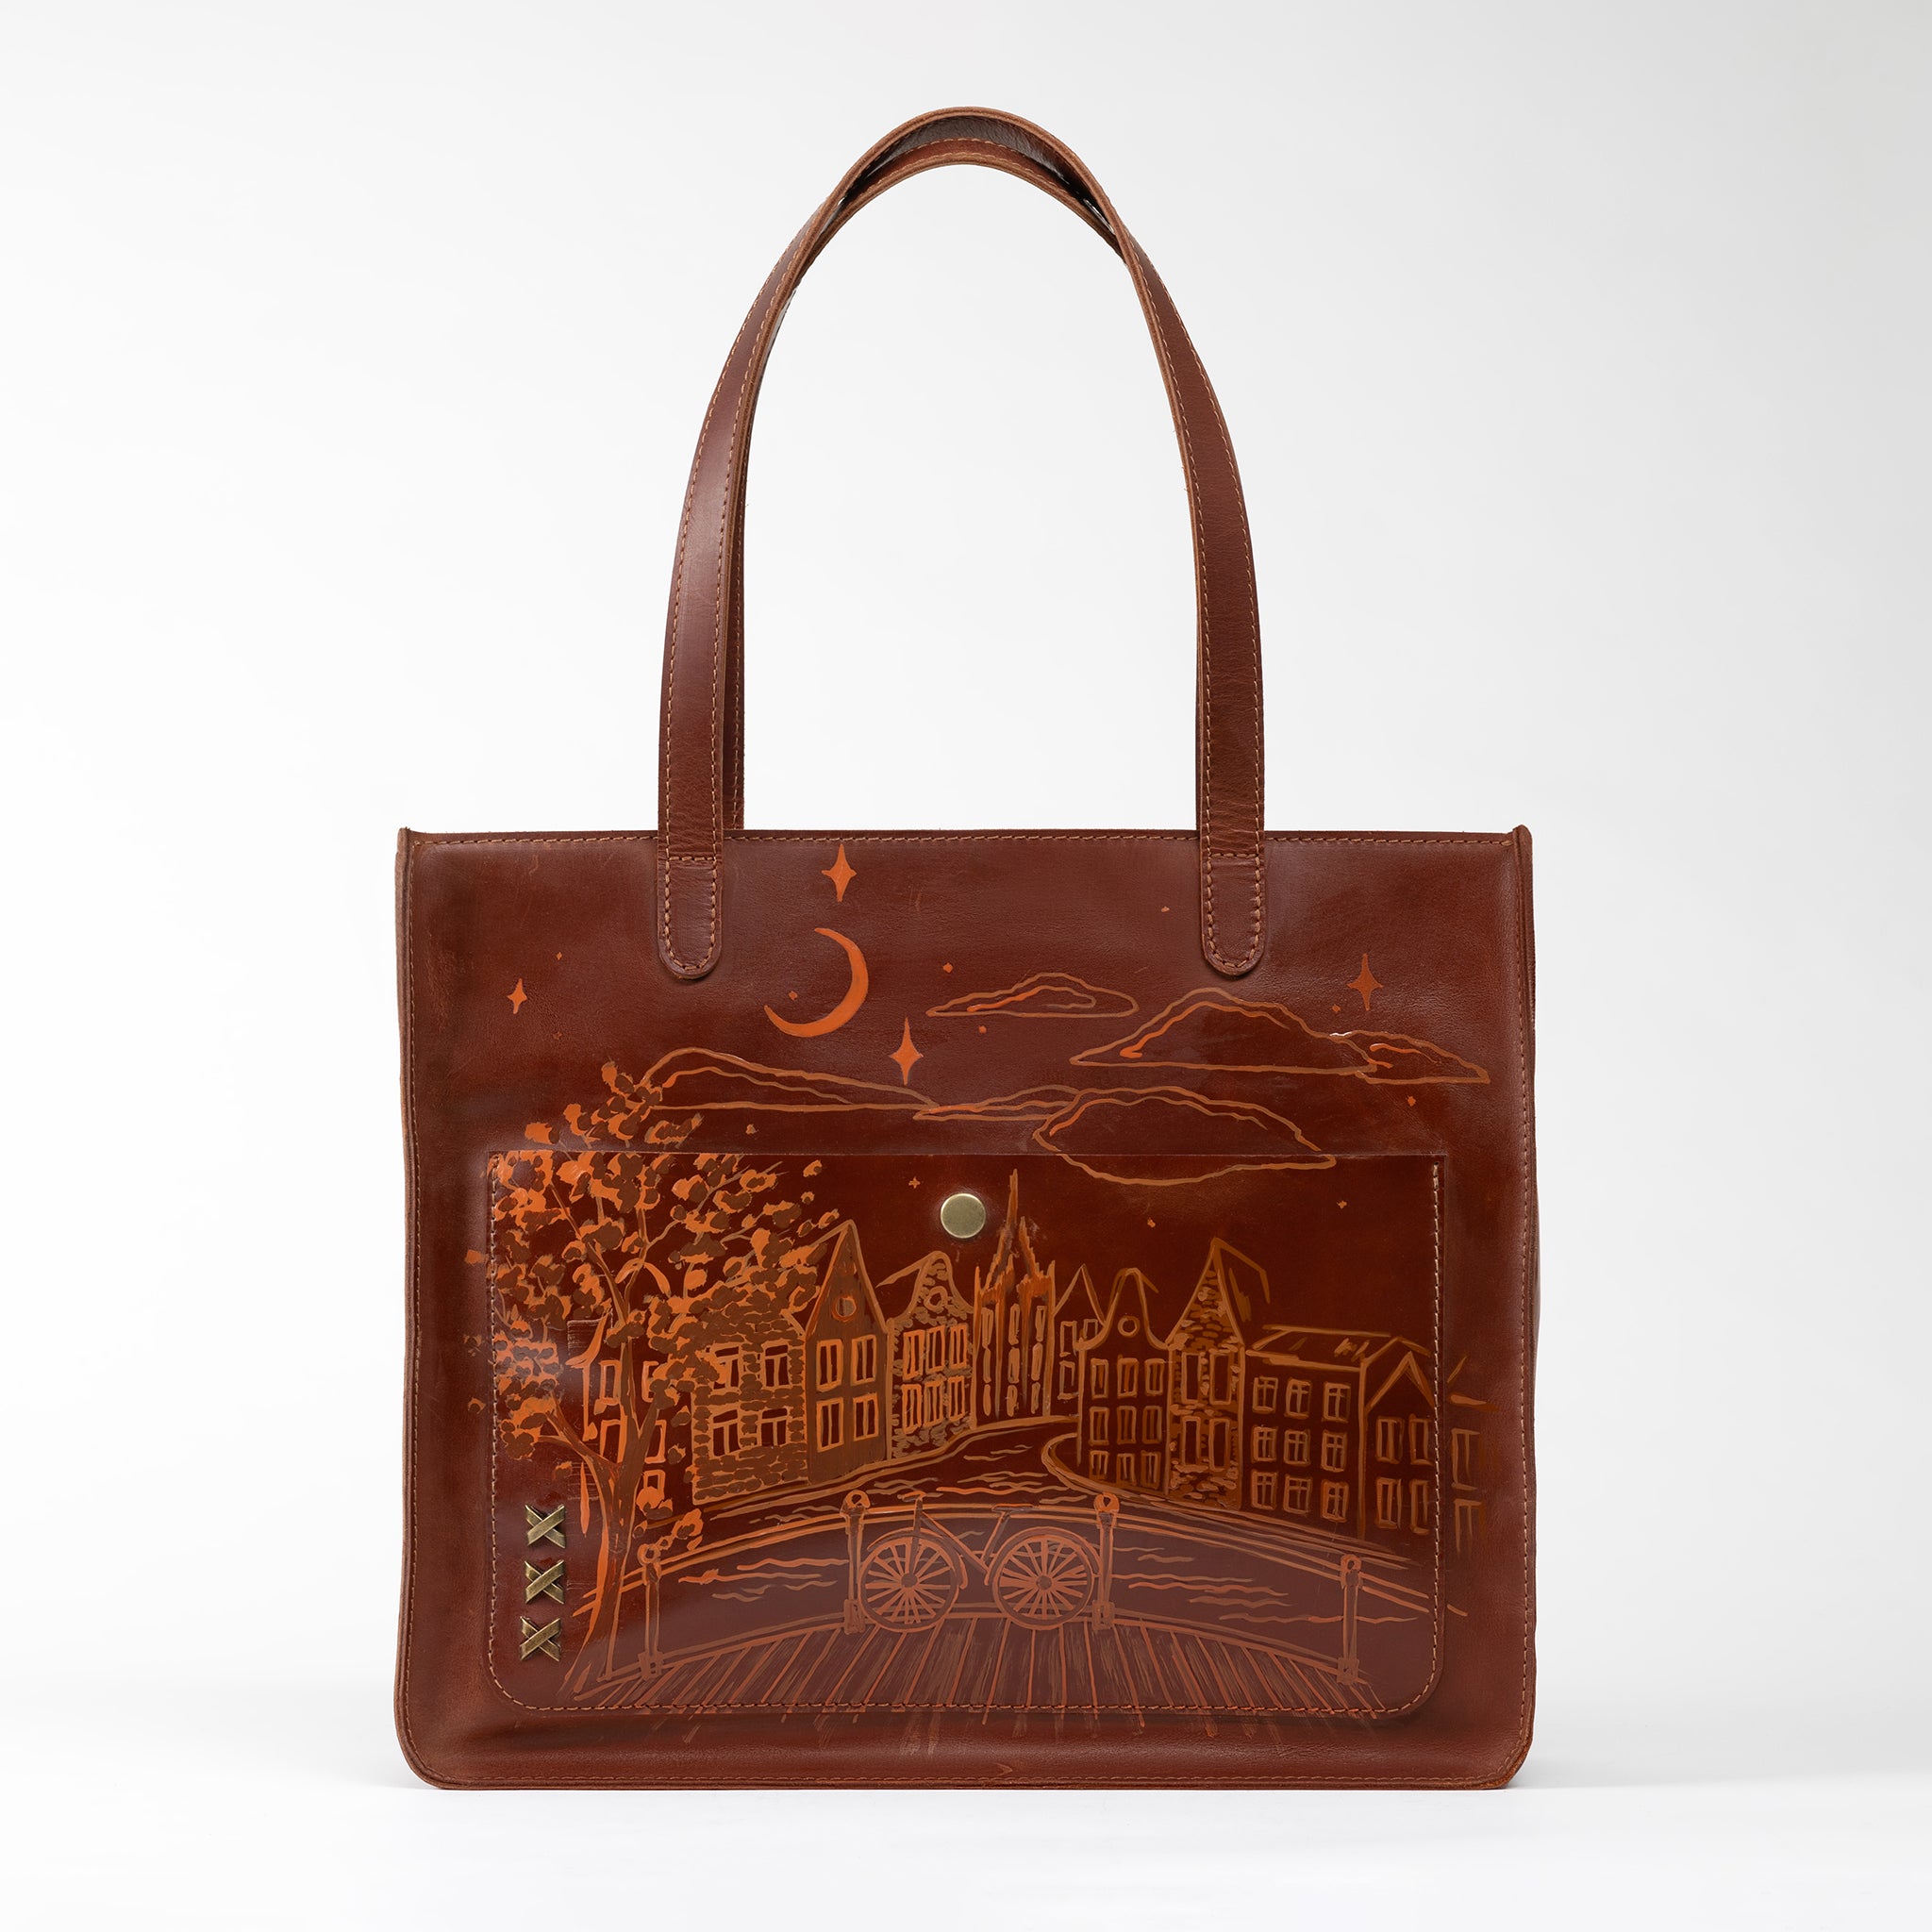 Amsterdam Tote Leather Bag with Hand-Drawn Dutch Street Illustration